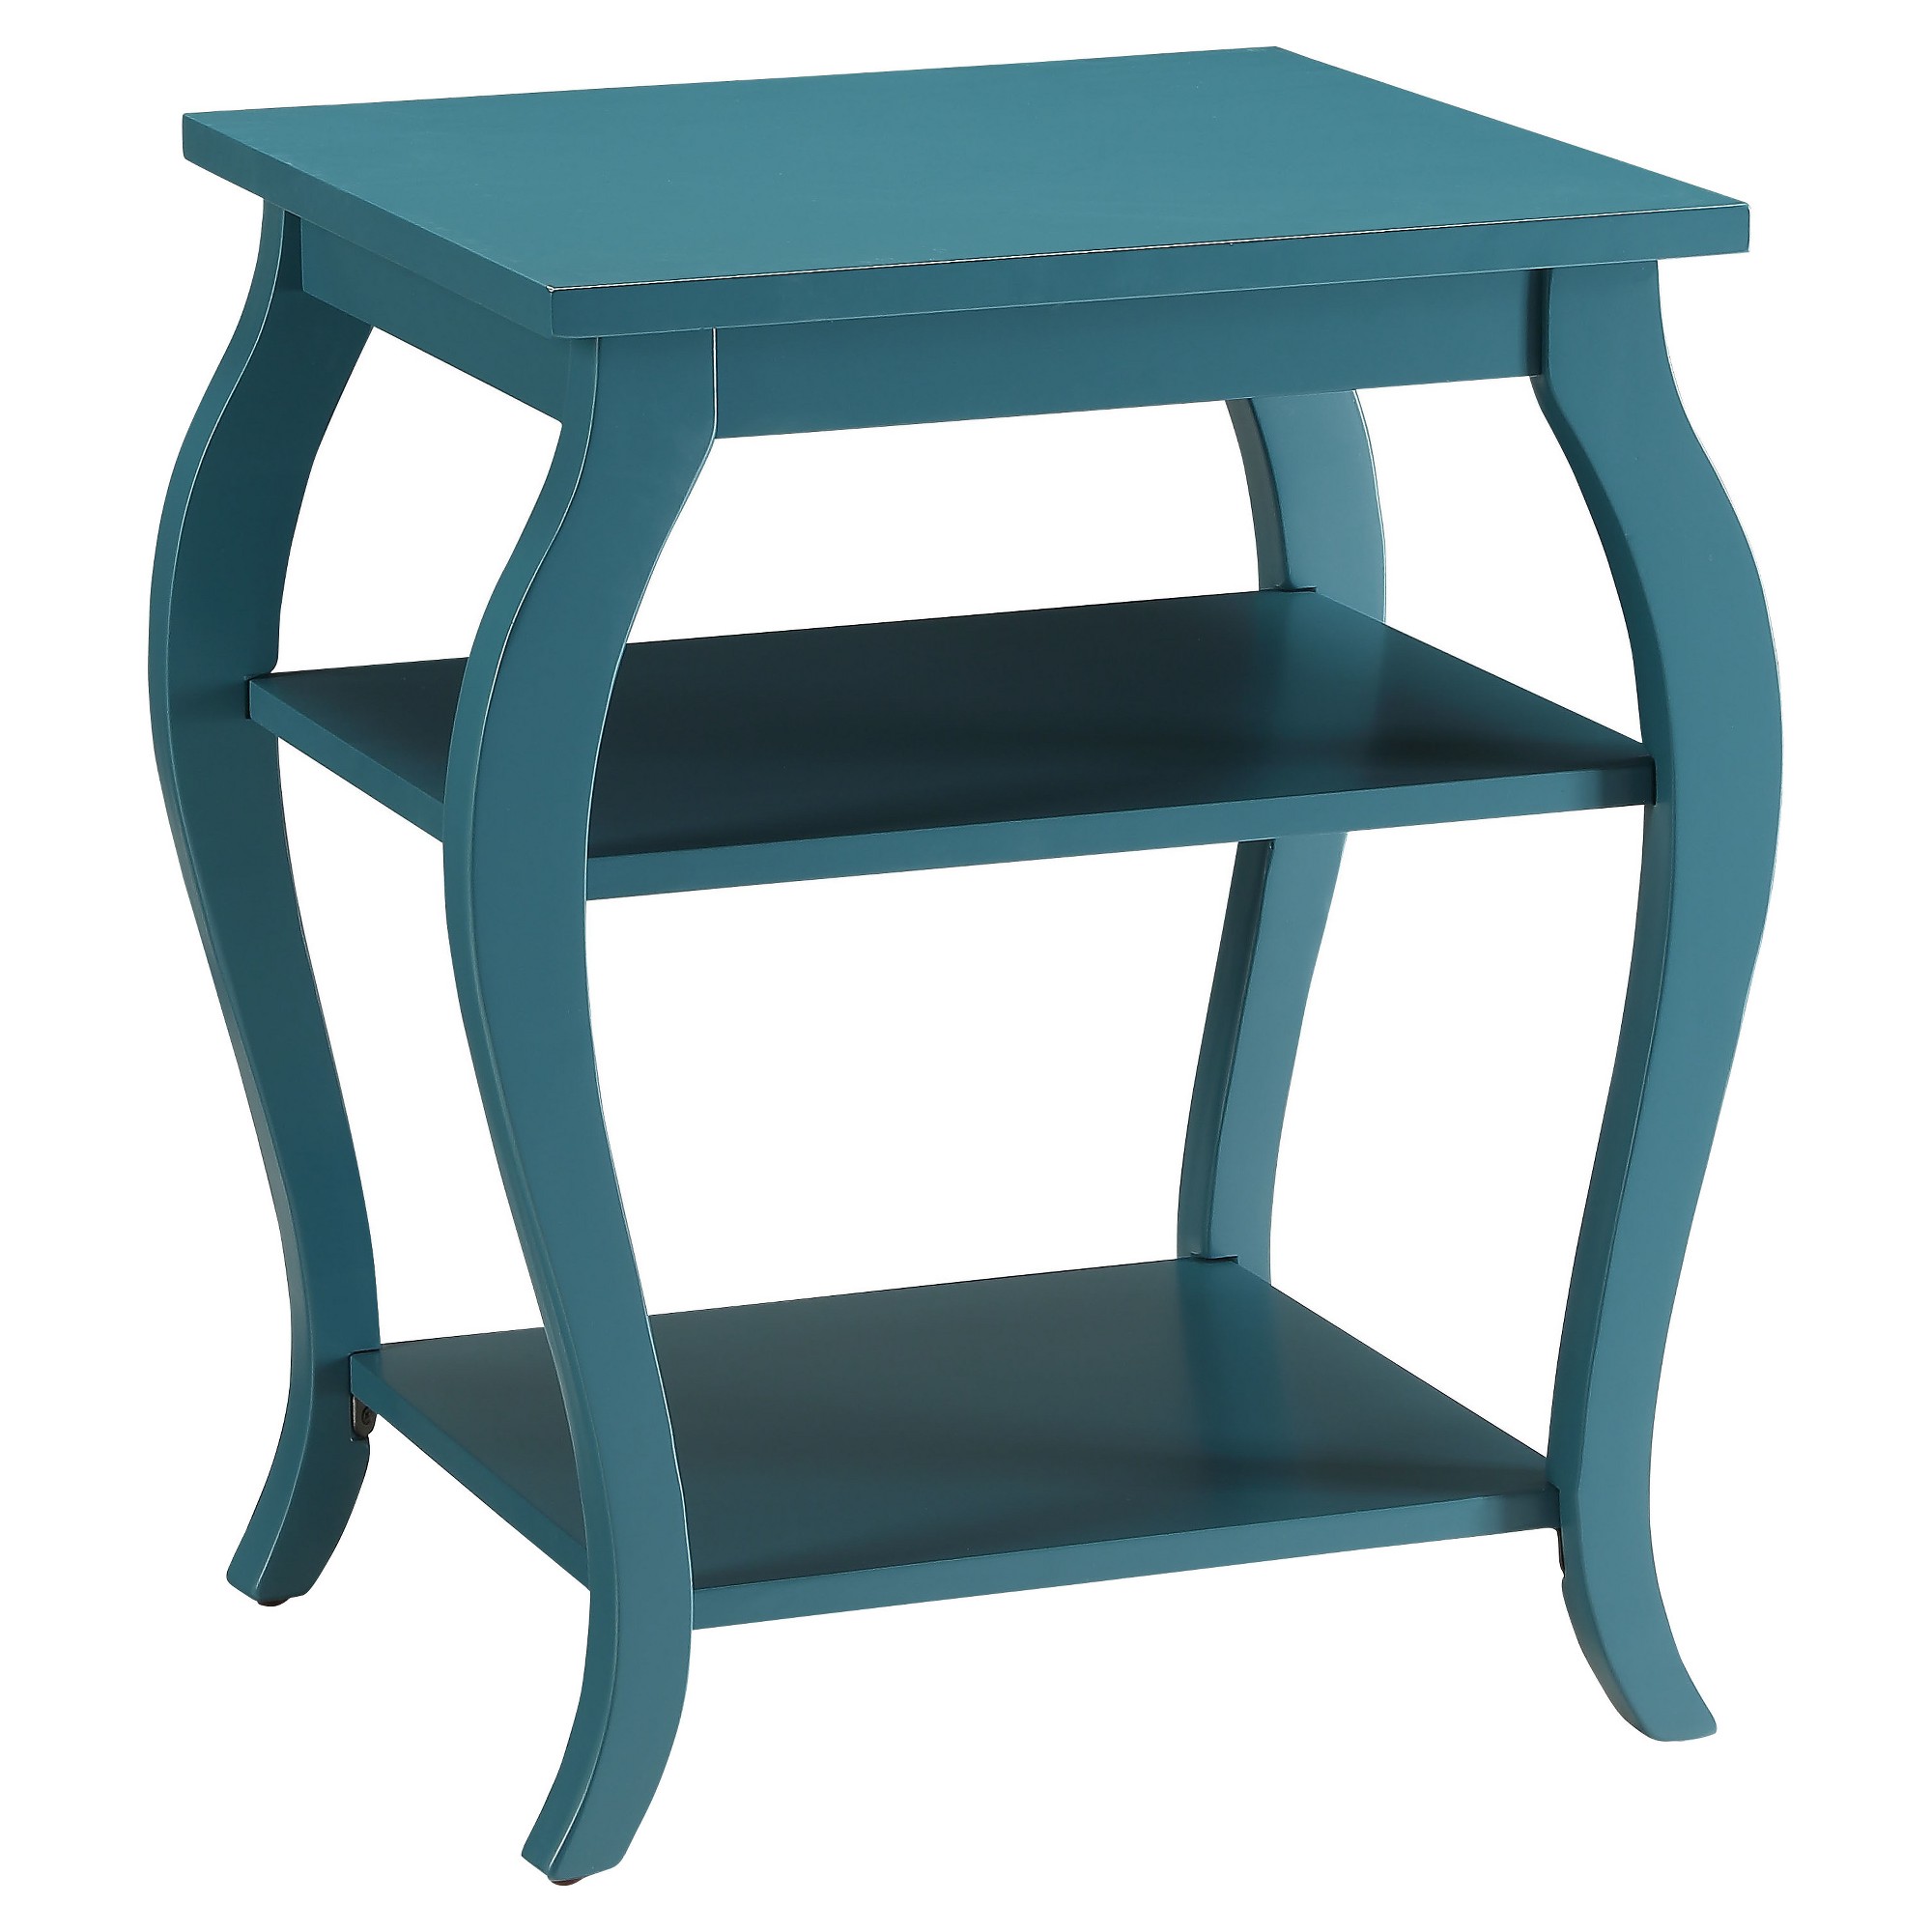 winsome teal green accent tables colored decorative glass furniture ott kijiji threshold storage for sage outdoor living round room white antique modern cabinet and tall target